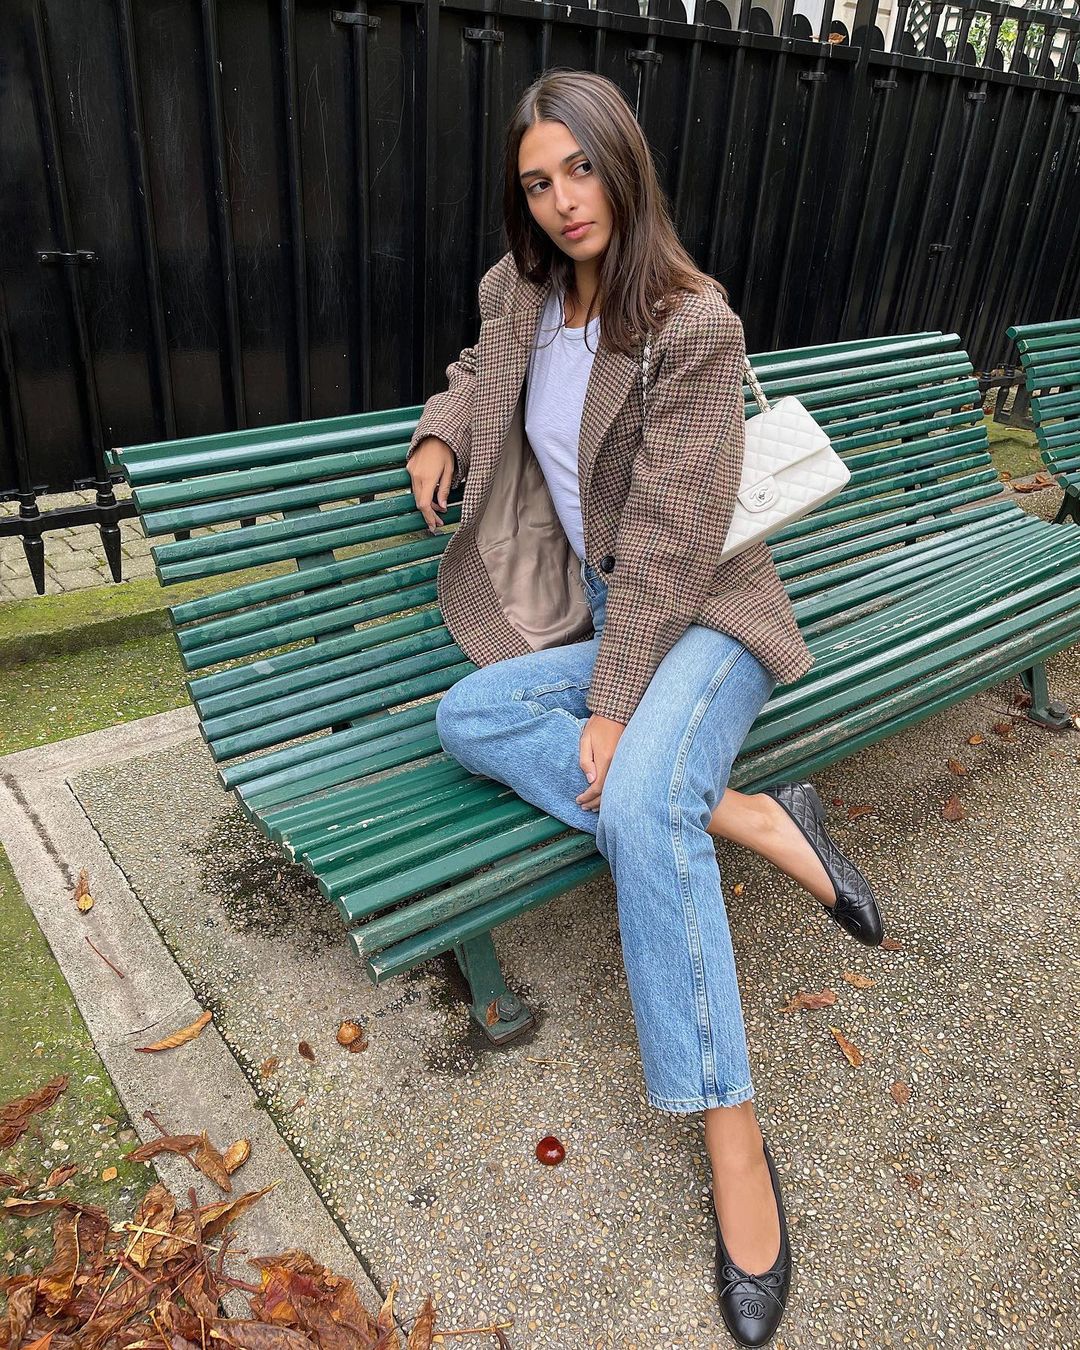 French girl autumn shoes: @salome.mory styles ballet flats with blue jeans and a check-print blazer